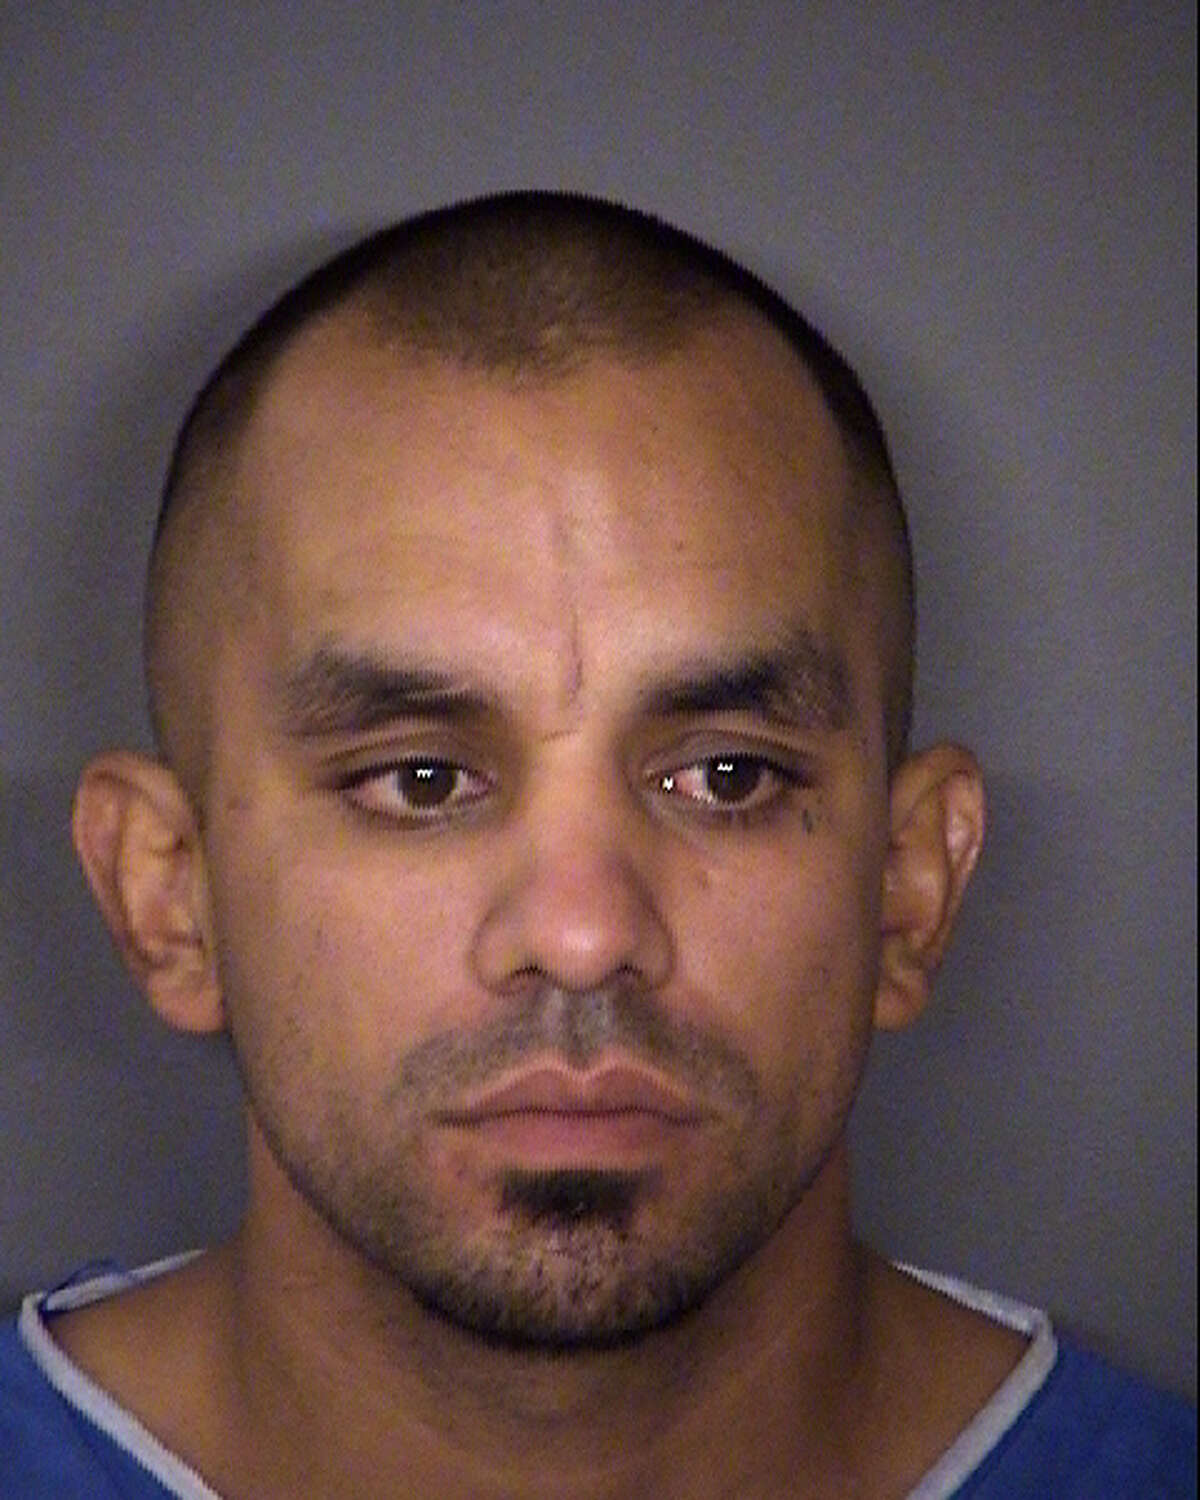 Gregory Huitron faces charges of aggravated kidnapping and aggravated assault with a deadly weapon. He remains in the Bexar County Jail on a $125,000 bond.